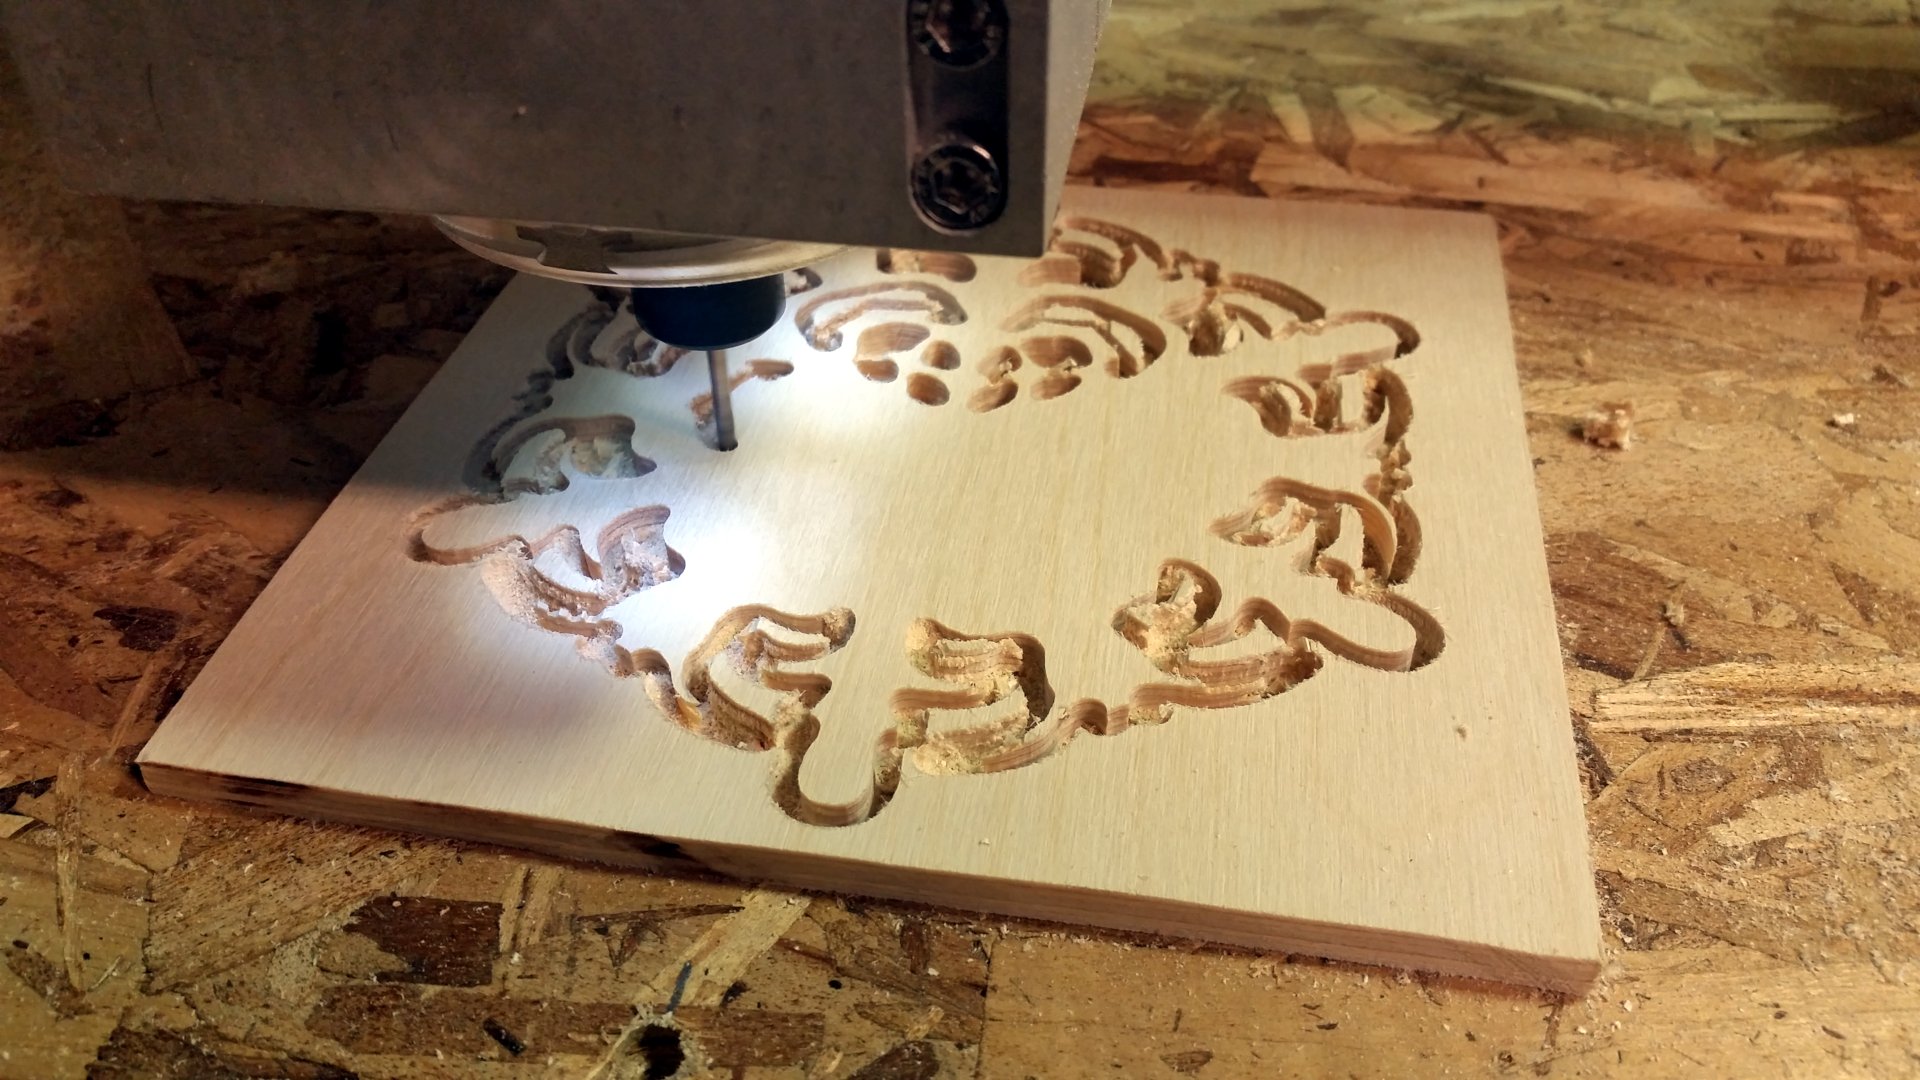 Shapeoko 3 Carving Wooden Snowflakes Out Of Quarter Inch Baltic Plywood